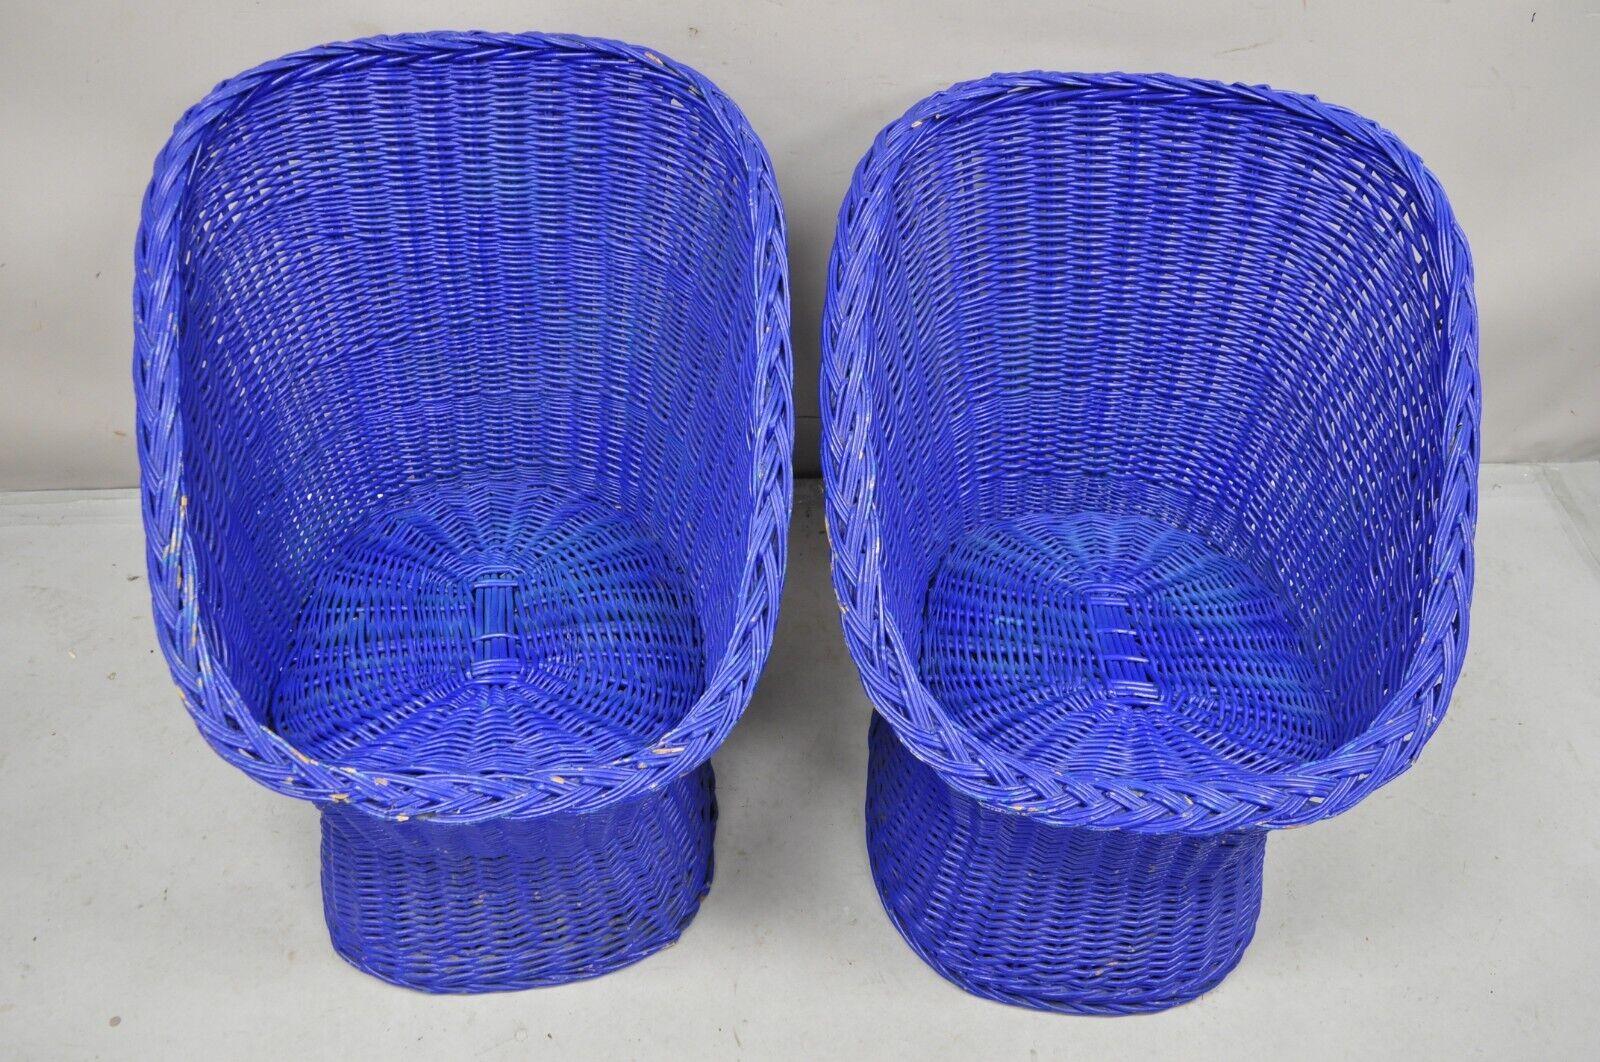 Vintage Mid Century Modern Blue Painted Wicker Rattan Pod Club Chairs - a Pair For Sale 6